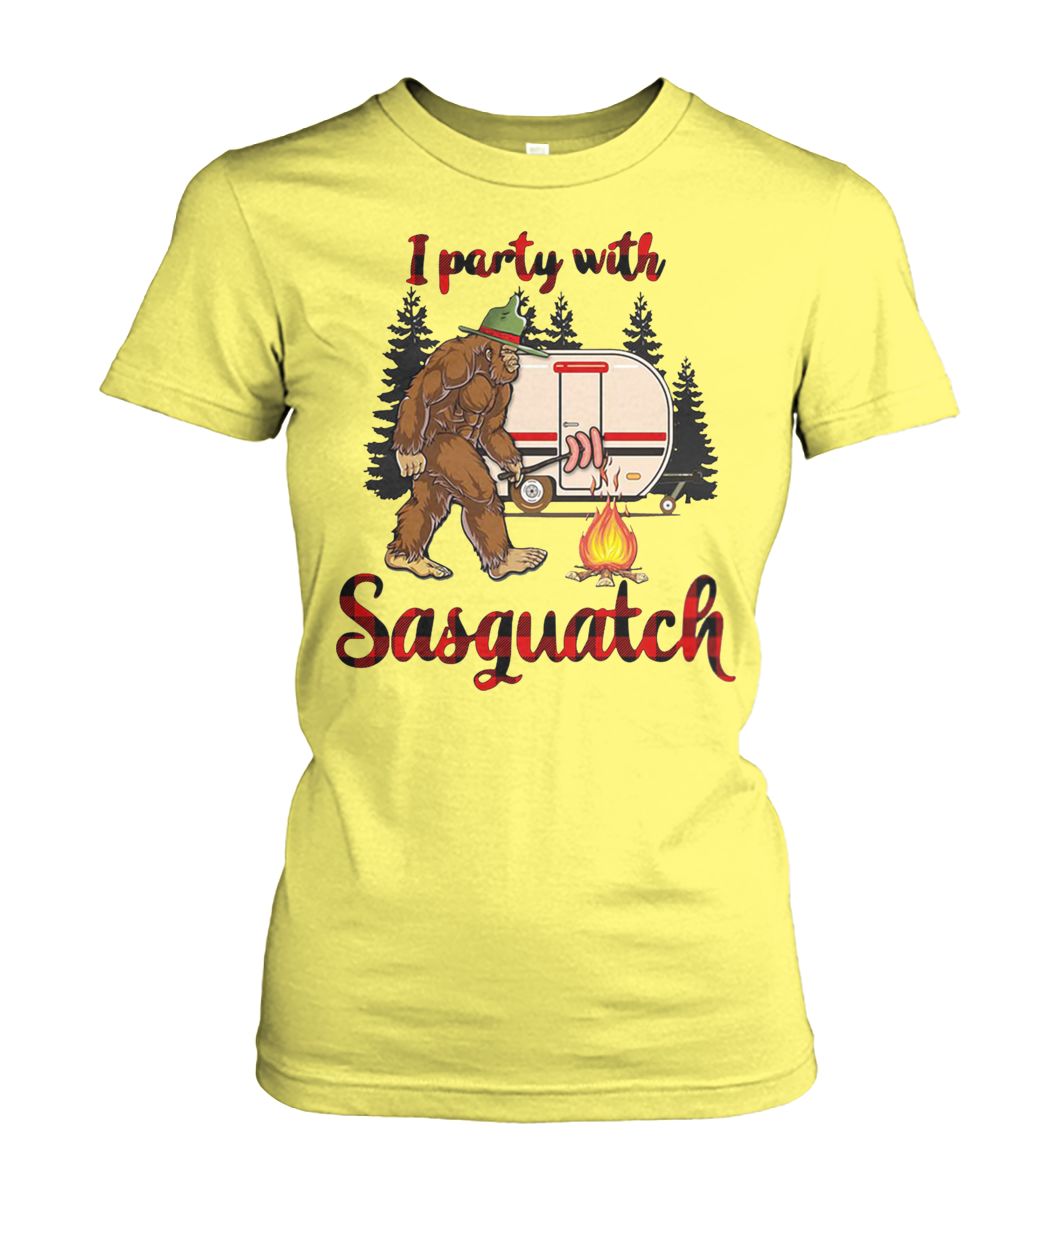 Bigfoot camping I party with sasquatch women's crew tee